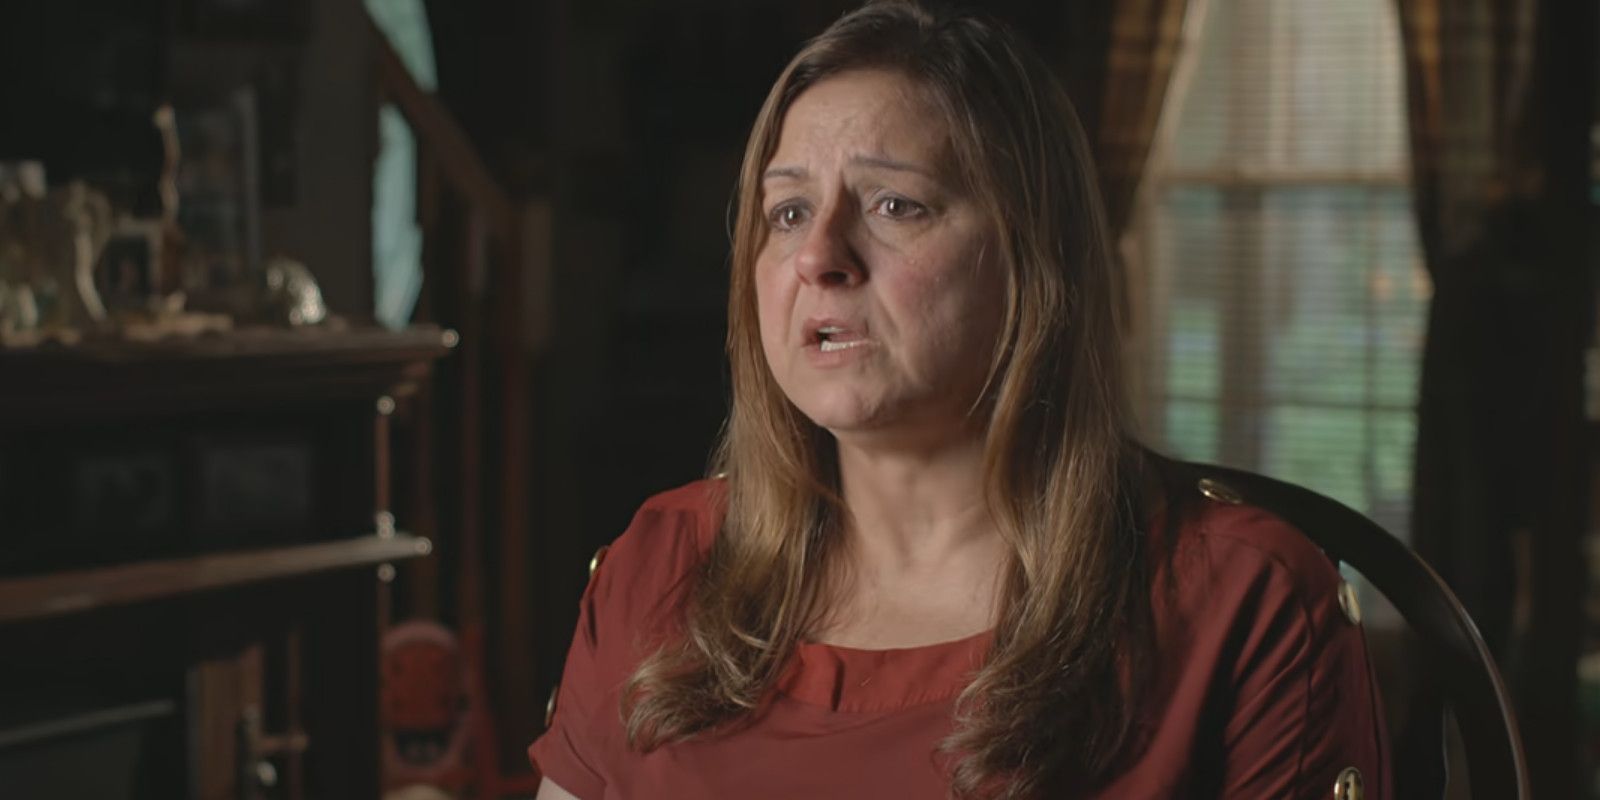 Dianne Valiante being interviewed in Unsolved Mysteries